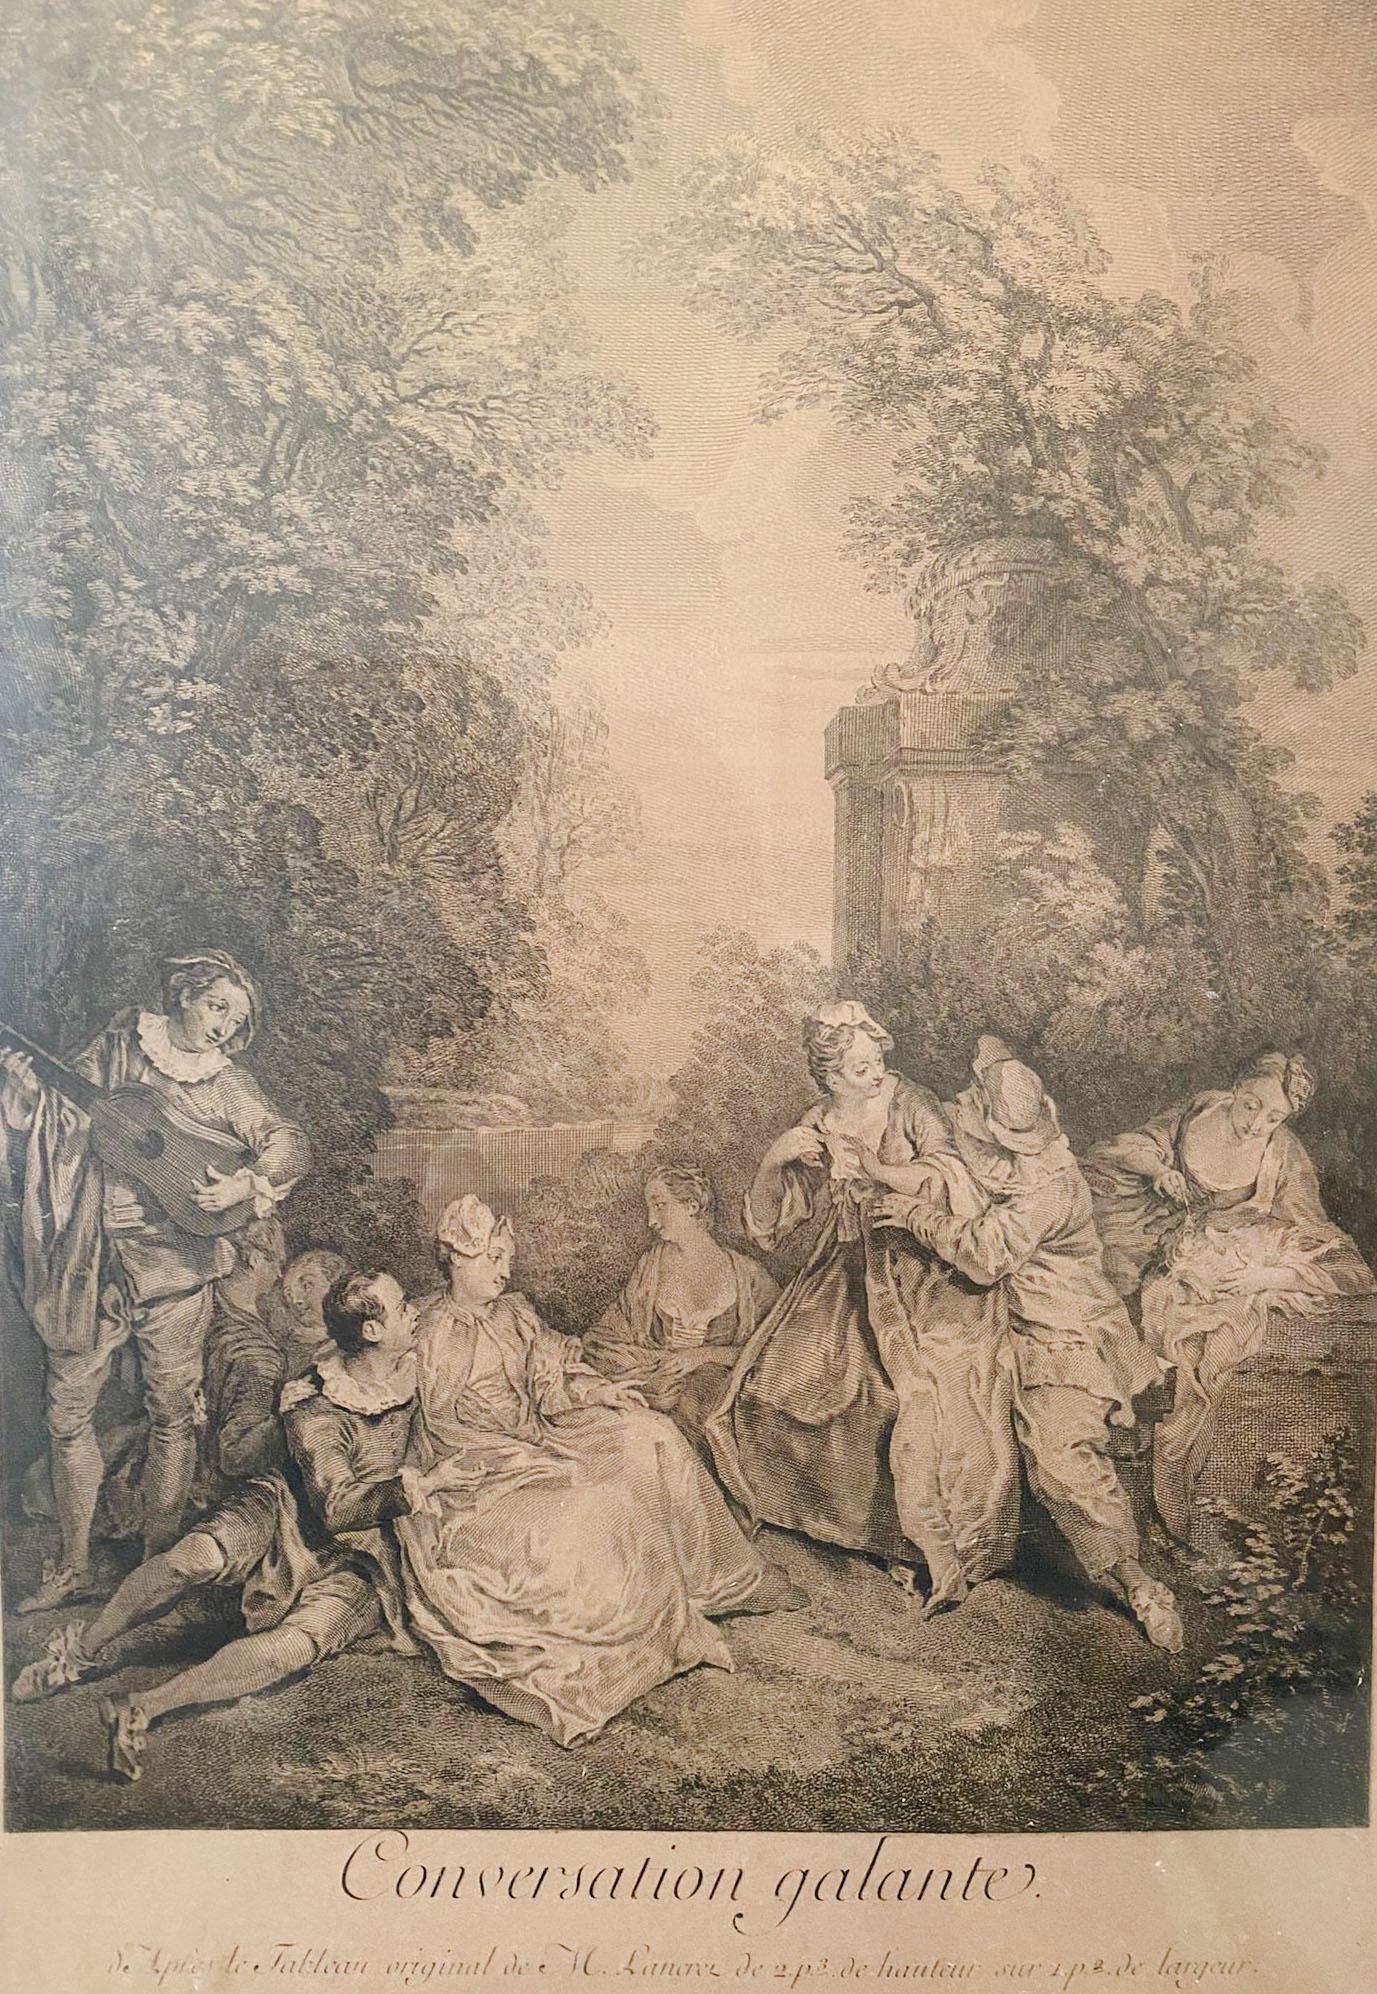 This charming engraving is the work of Jacques Philippe, after the one by Nicolas Lancret. This work is the one that was used for the reception of LeBas at the academy. This engraving represents 3 couples in gallant love. A woman is feeding a rabbit